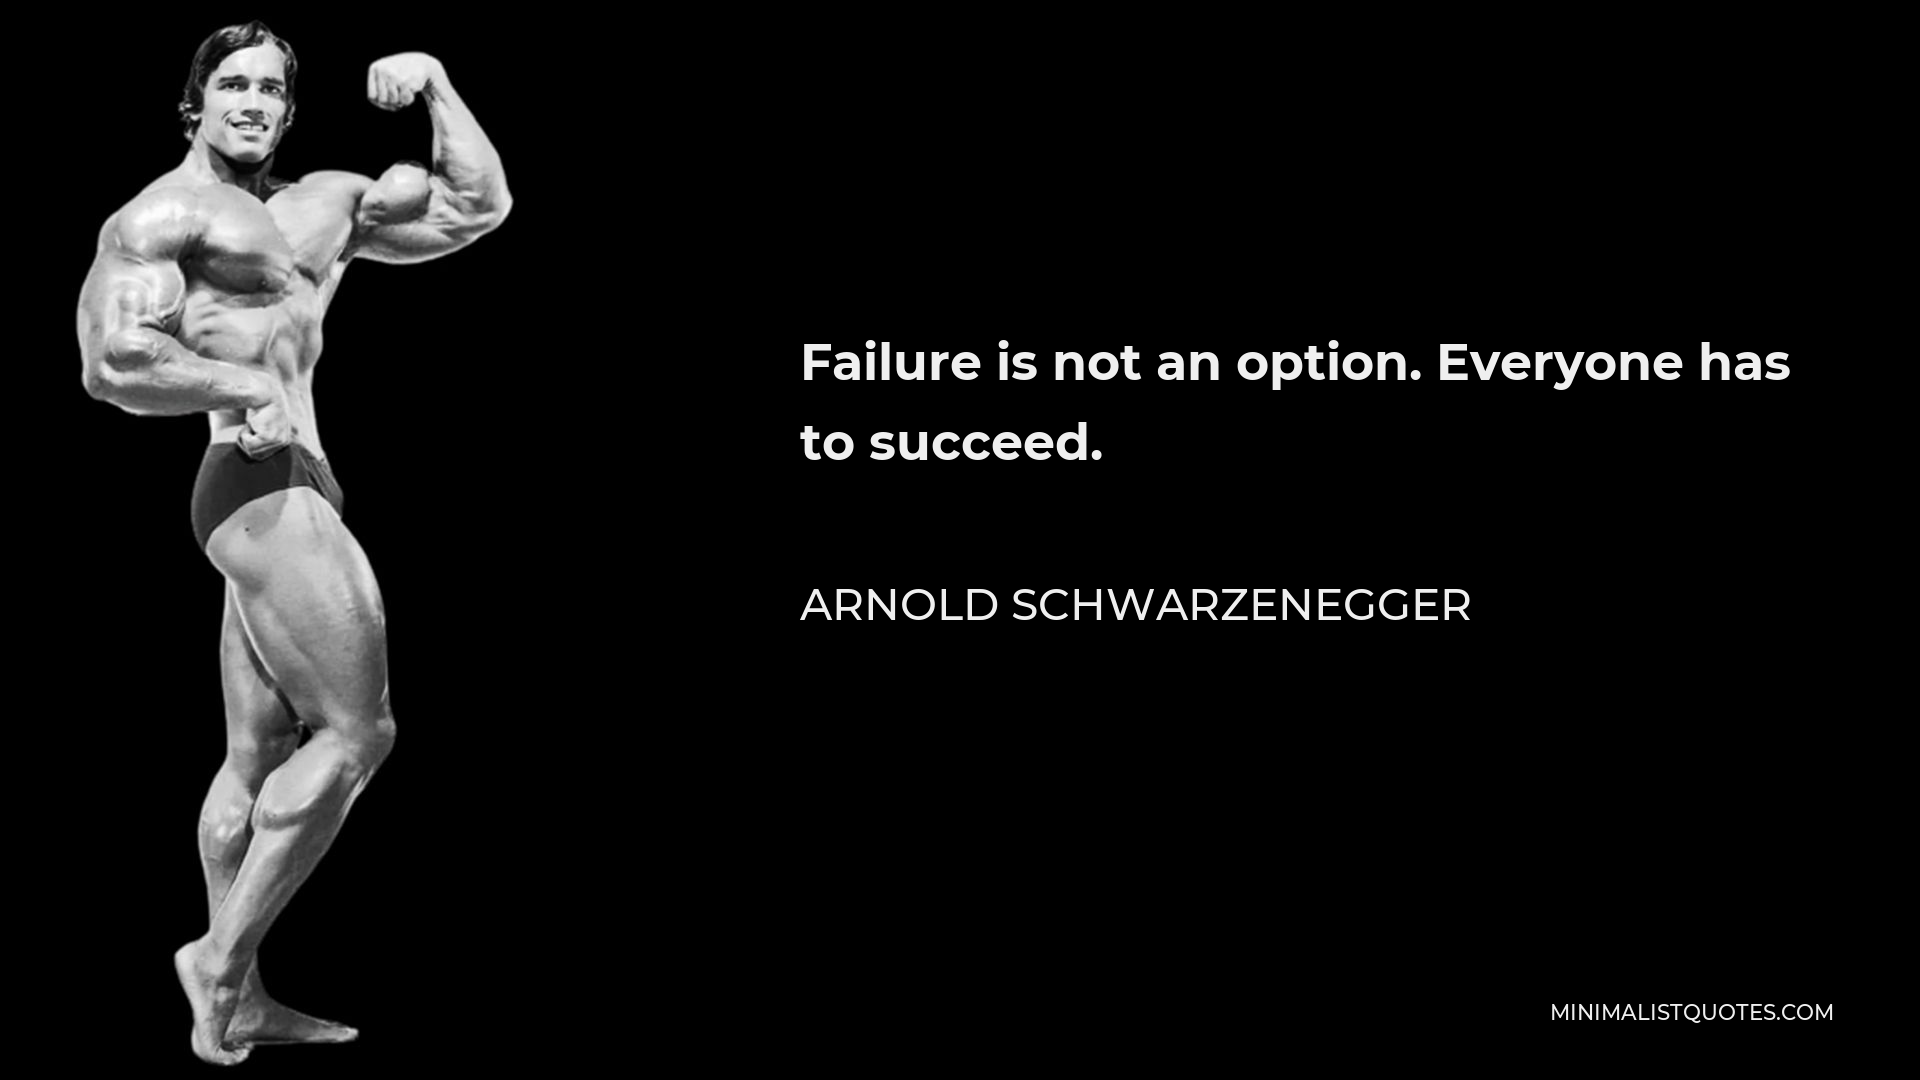 Arnold Schwarzenegger Quote - Failure is not an option. Everyone has to succeed.